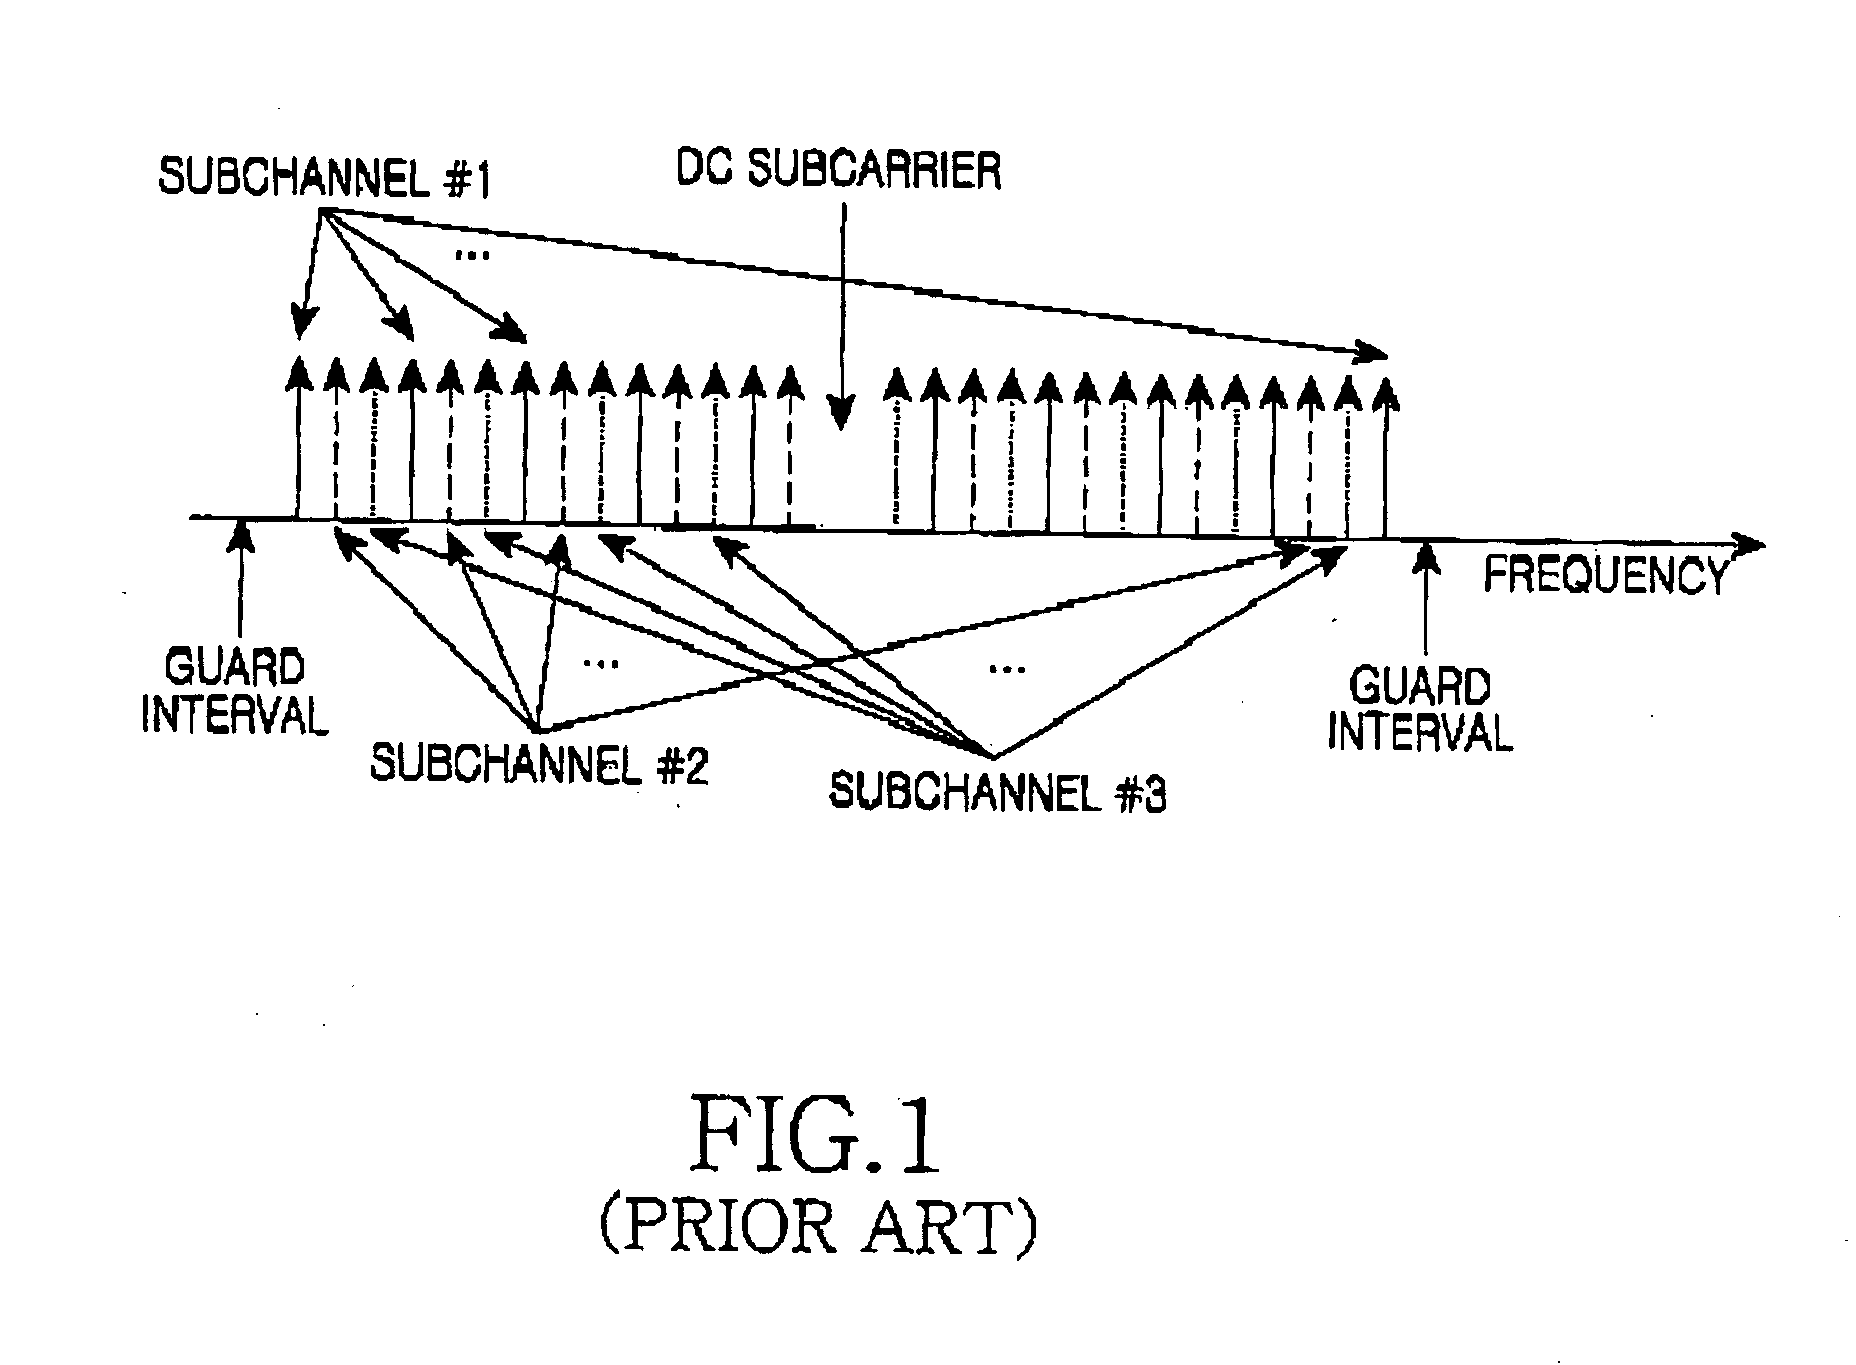 Method and apparatus for transmitting/receiving channel quality information in a communication system using an orthogonal frequency division multiplexing scheme